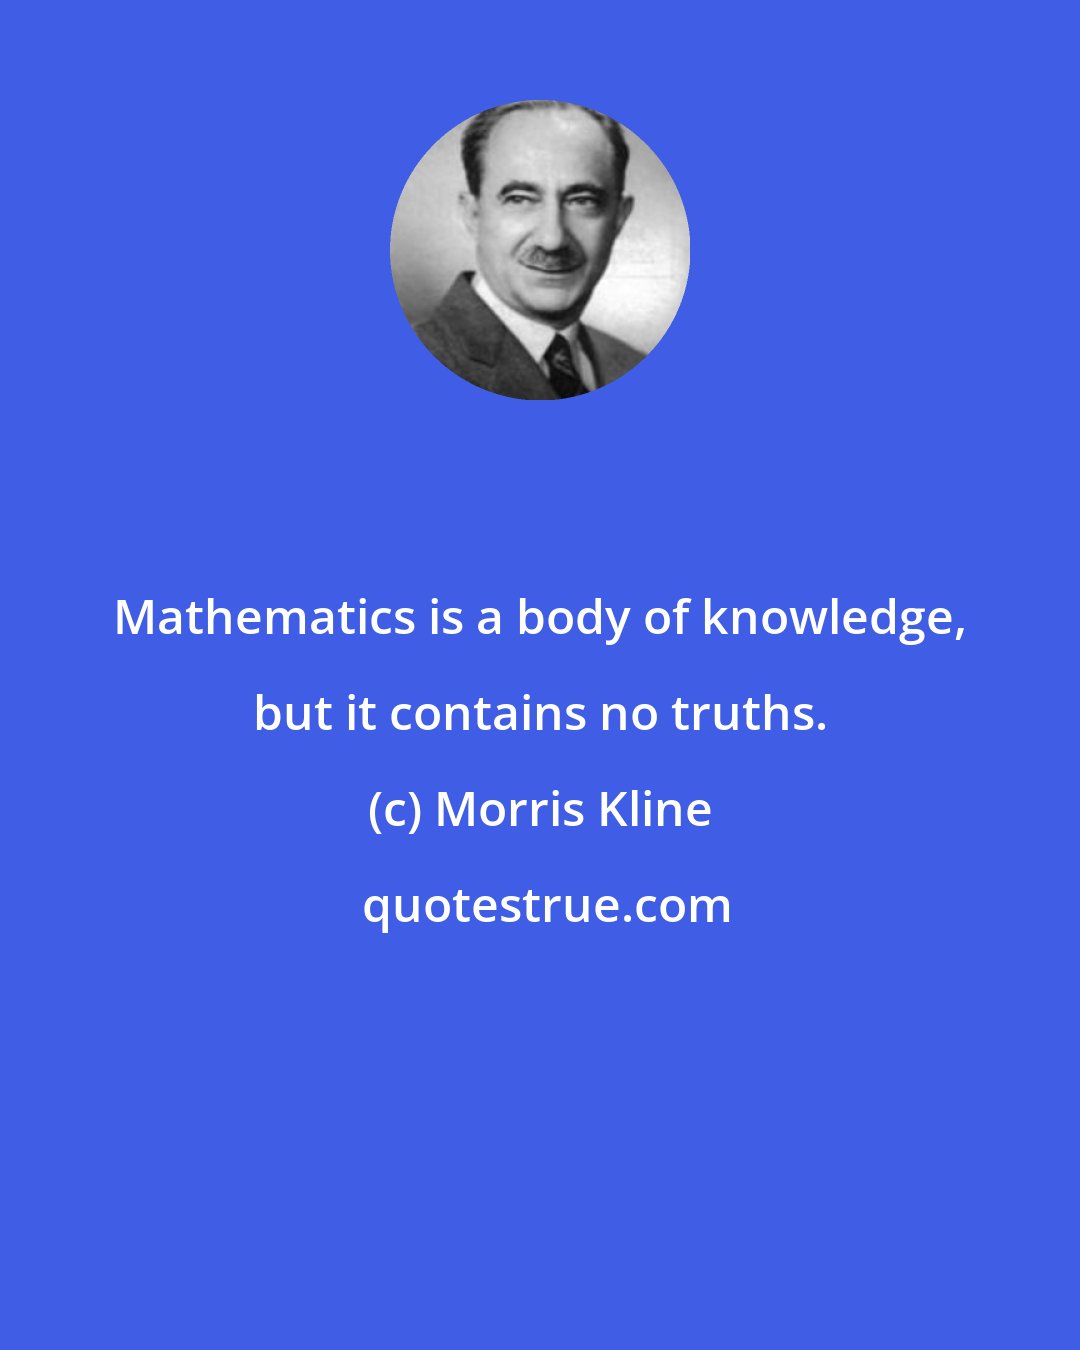 Morris Kline: Mathematics is a body of knowledge, but it contains no truths.